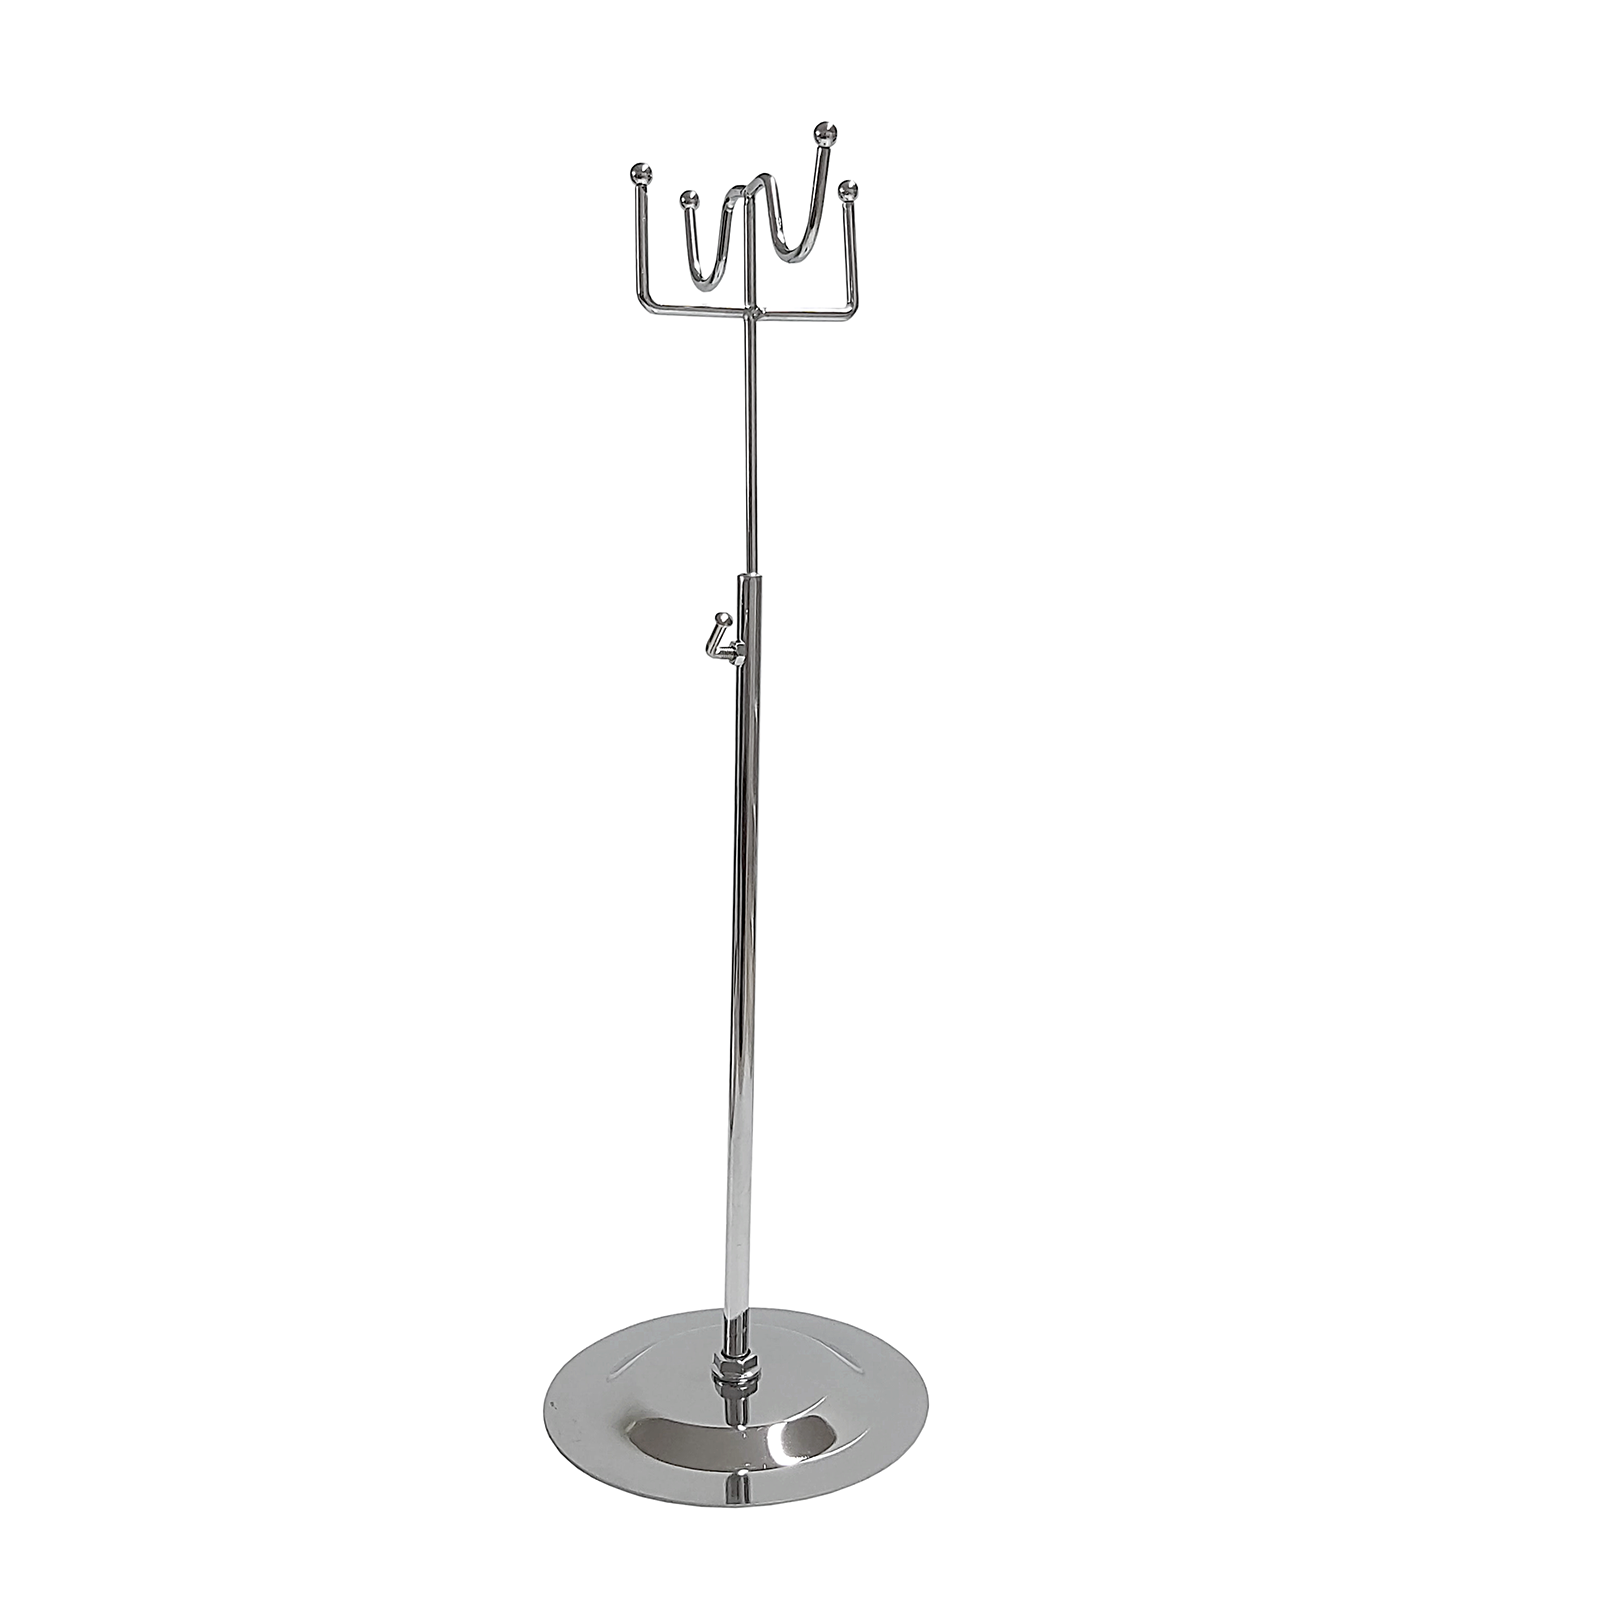 Handbag Display - 4 Arm Hanger  - Counter Unit in Chrome for Handbags, Purses and Scarves (G200)